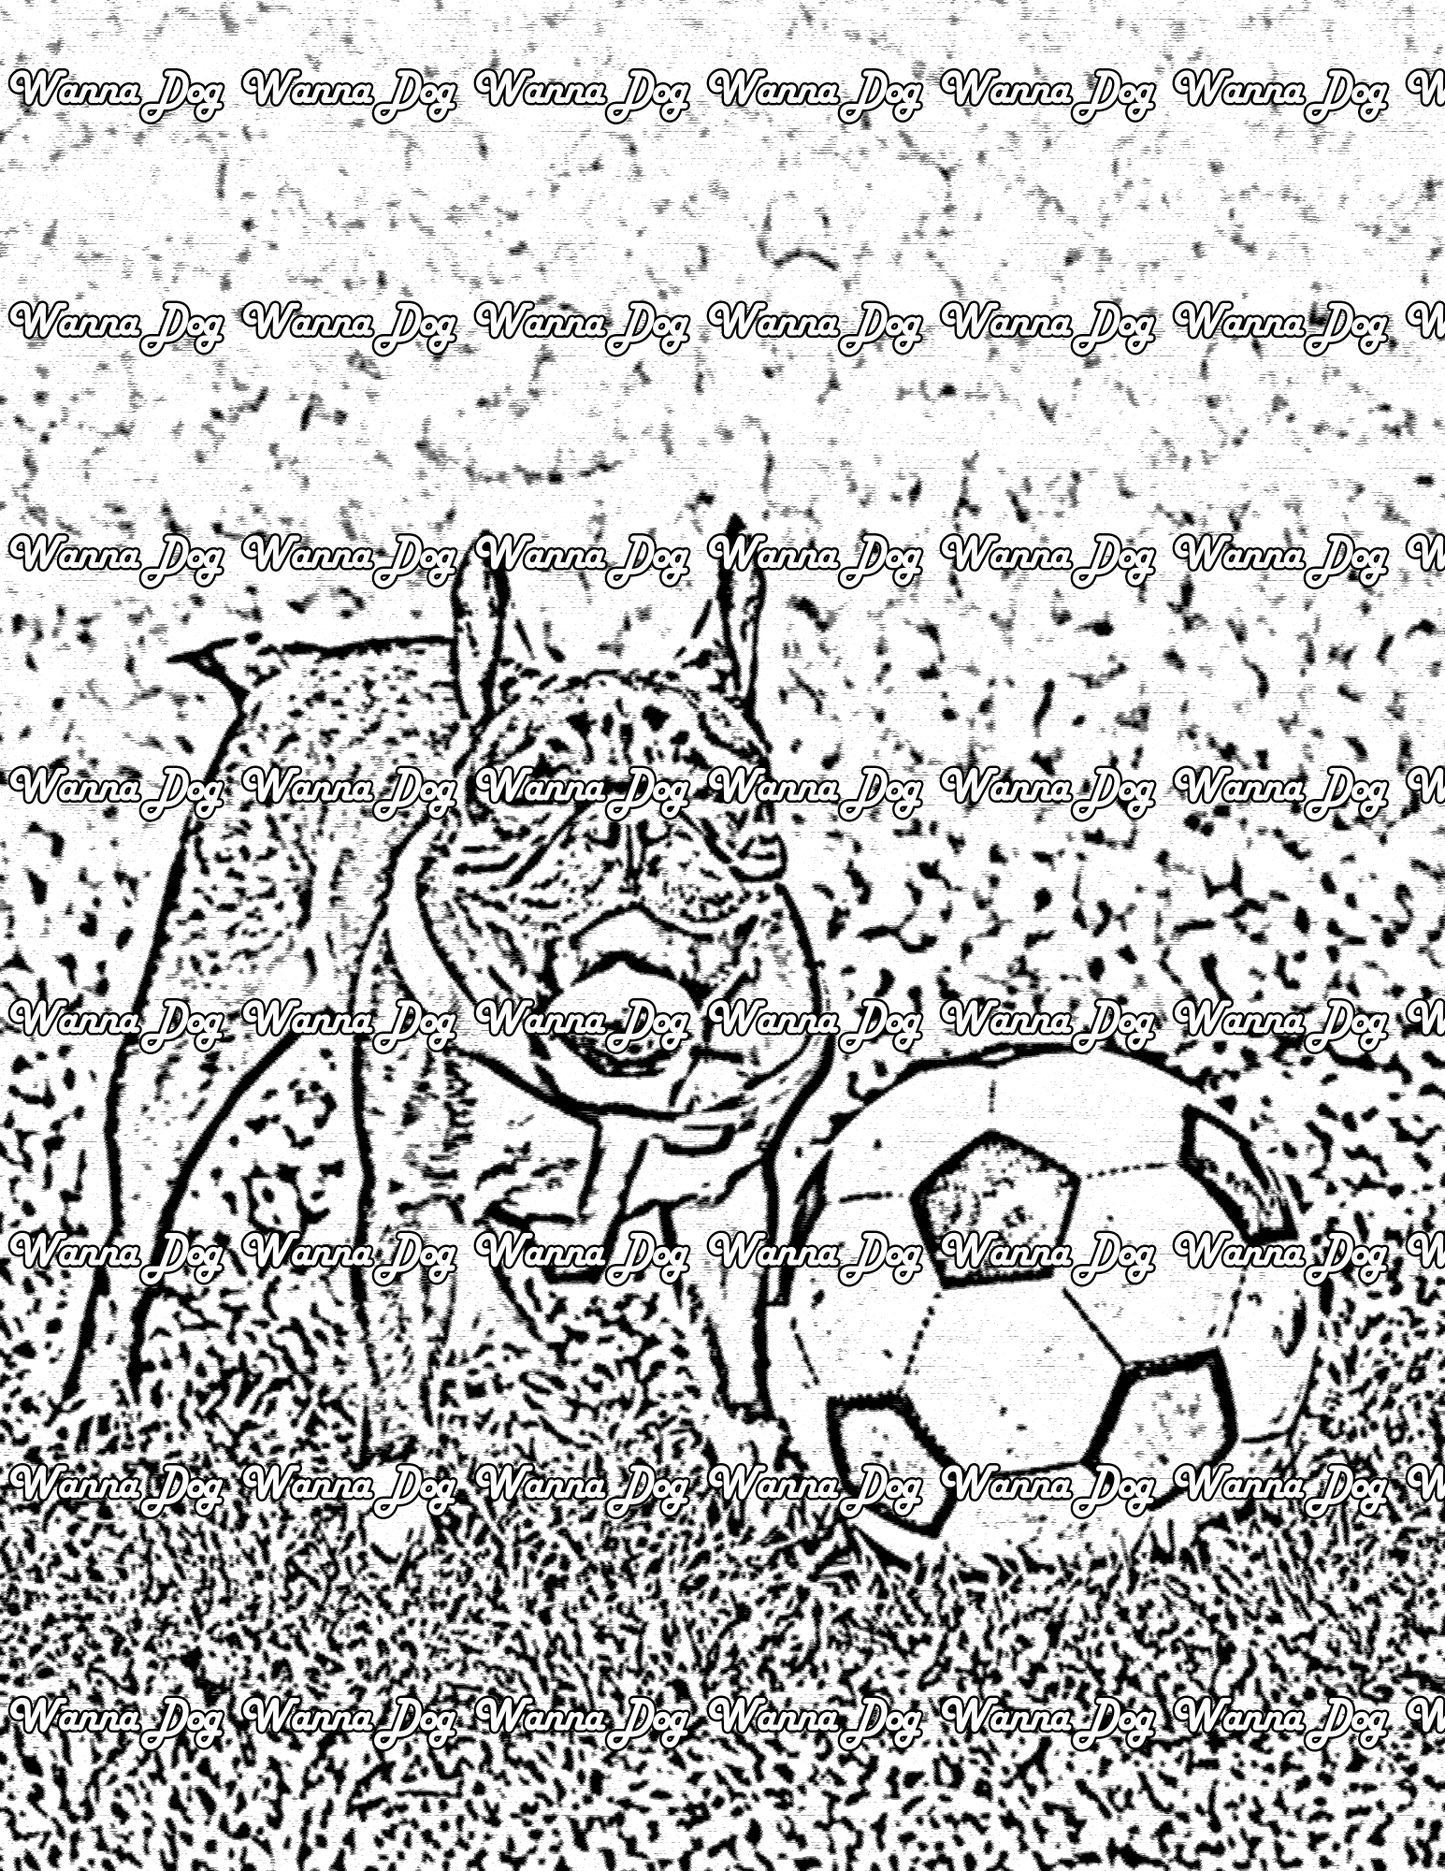 Boston Terrier Coloring Page of a Boston Terrier playing soccer